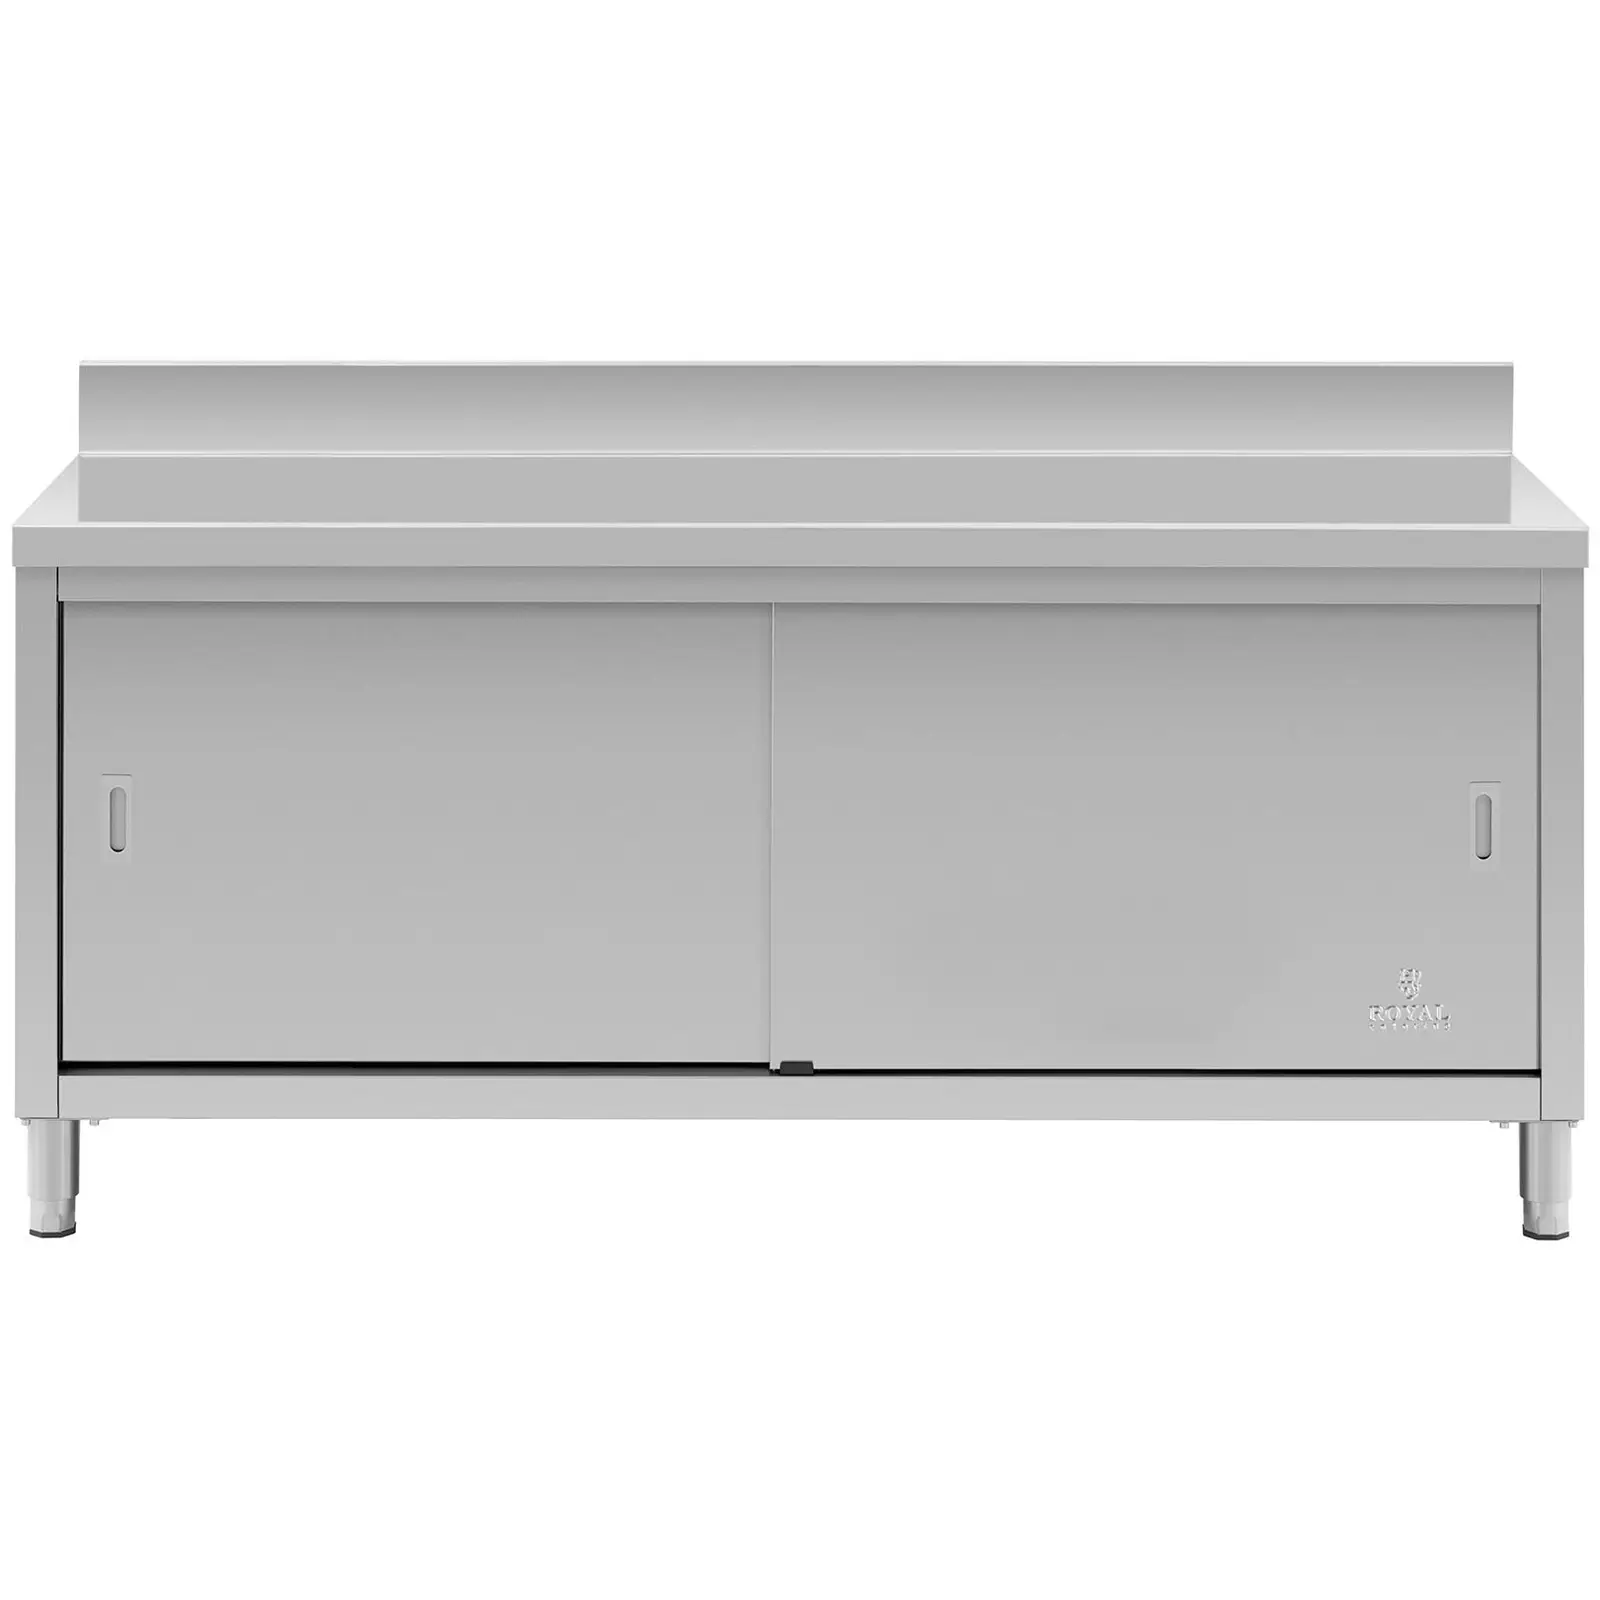 Work Cabinet - upstand - 180 x 70 cm - 600 kg load capacity